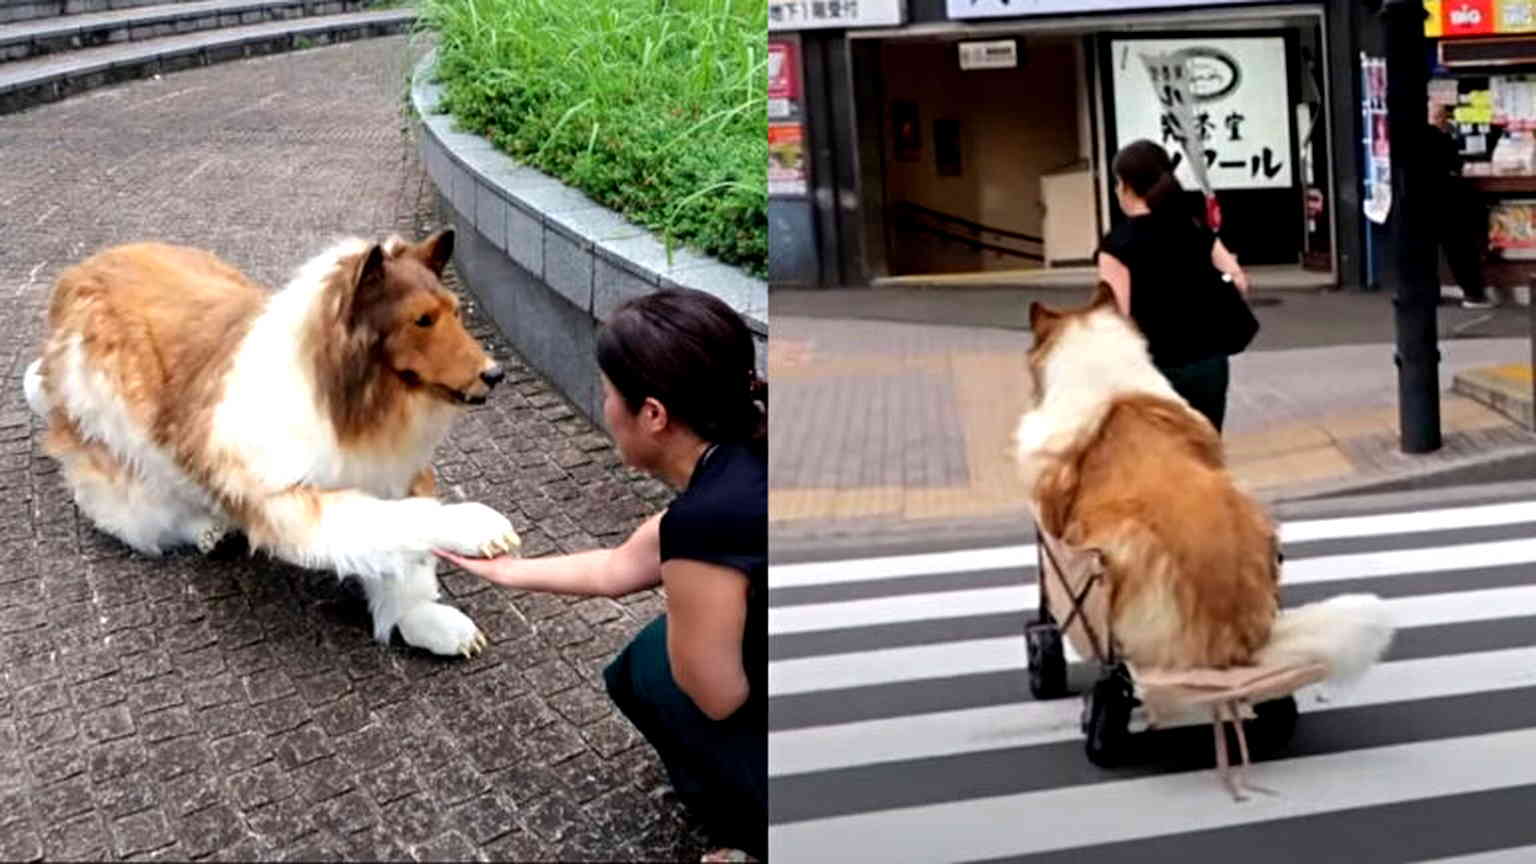 Japanese man who spent $16,000 to become a dog ‘fails’ agility test